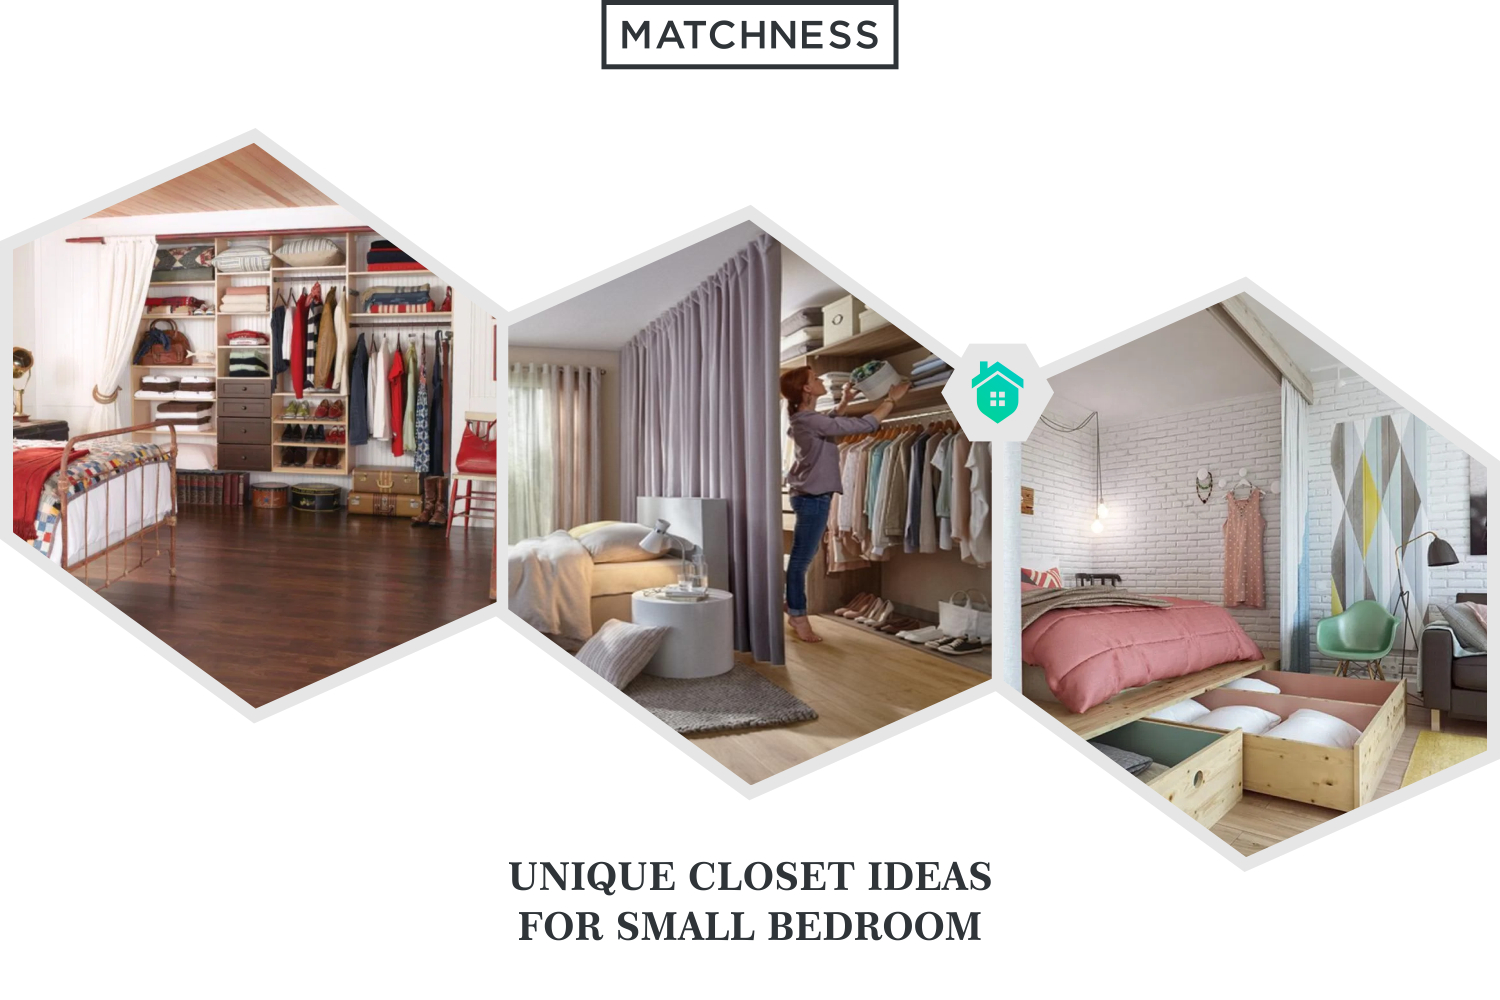 Unique Closet Ideas for Small Bedroom? Try These 26 Themes - Matchness.com